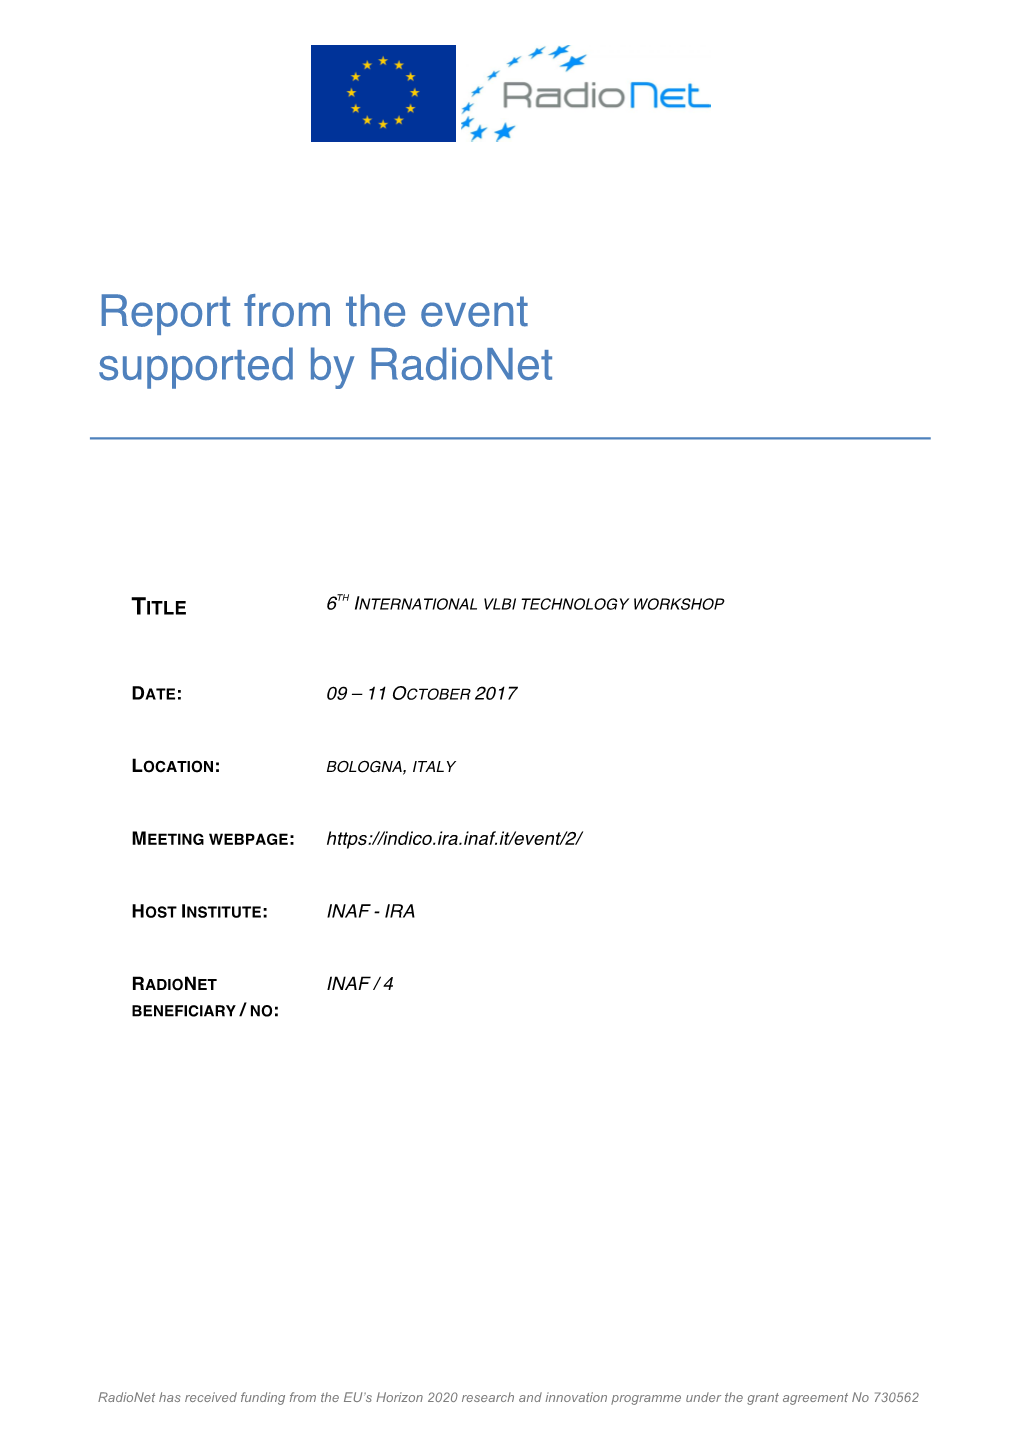 Report from the Event Supported by Radionet